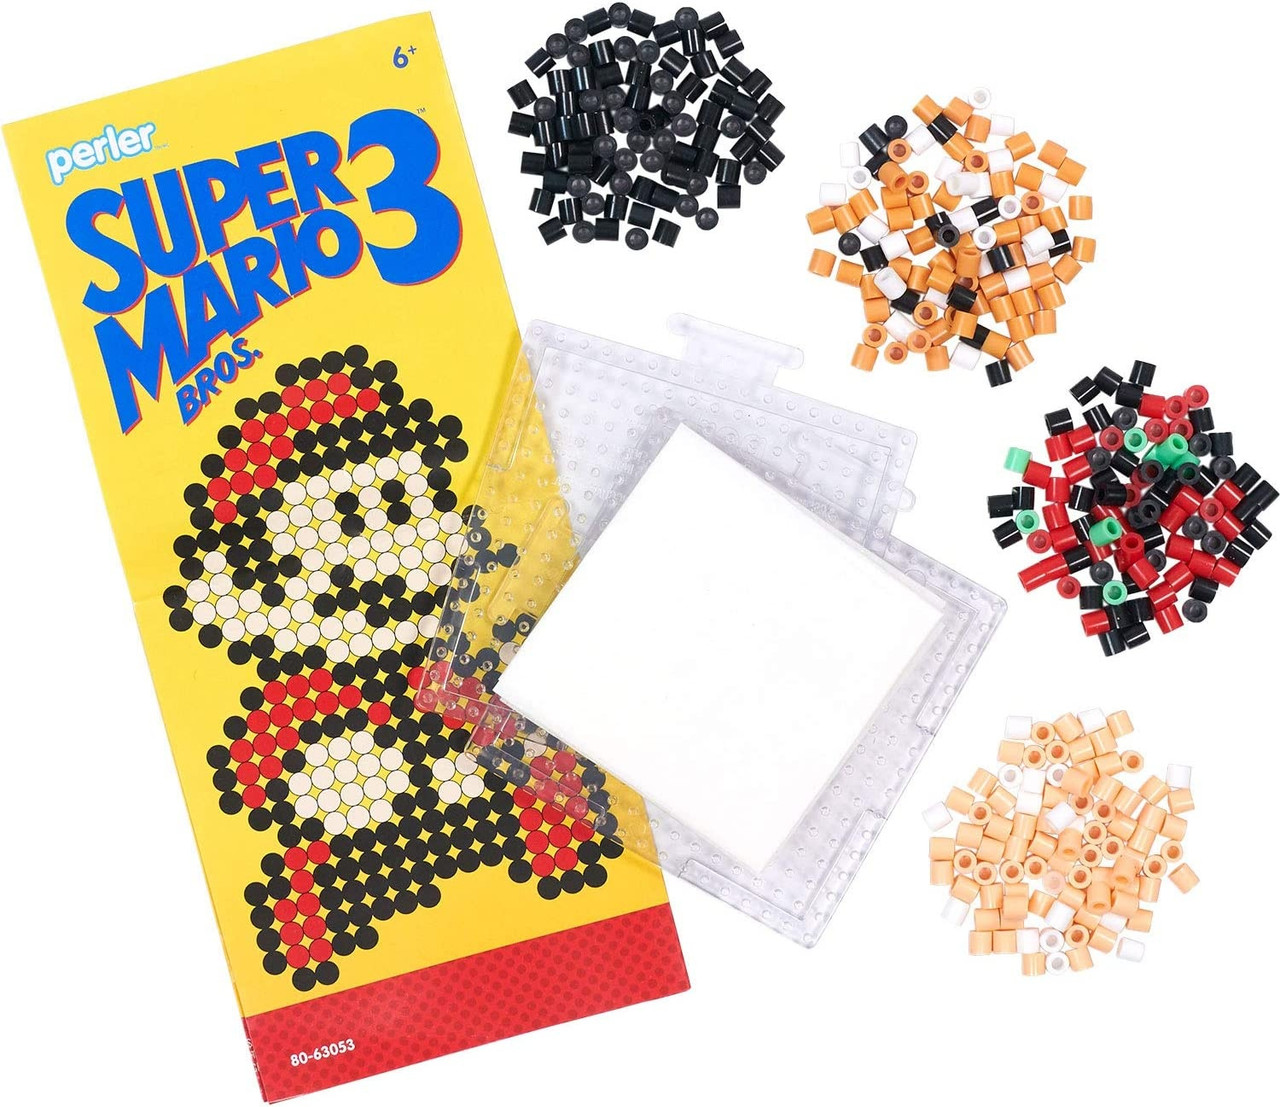 Perler Fused Bead Activity Kit-Forest Friends Arch 80-63056 - GettyCrafts